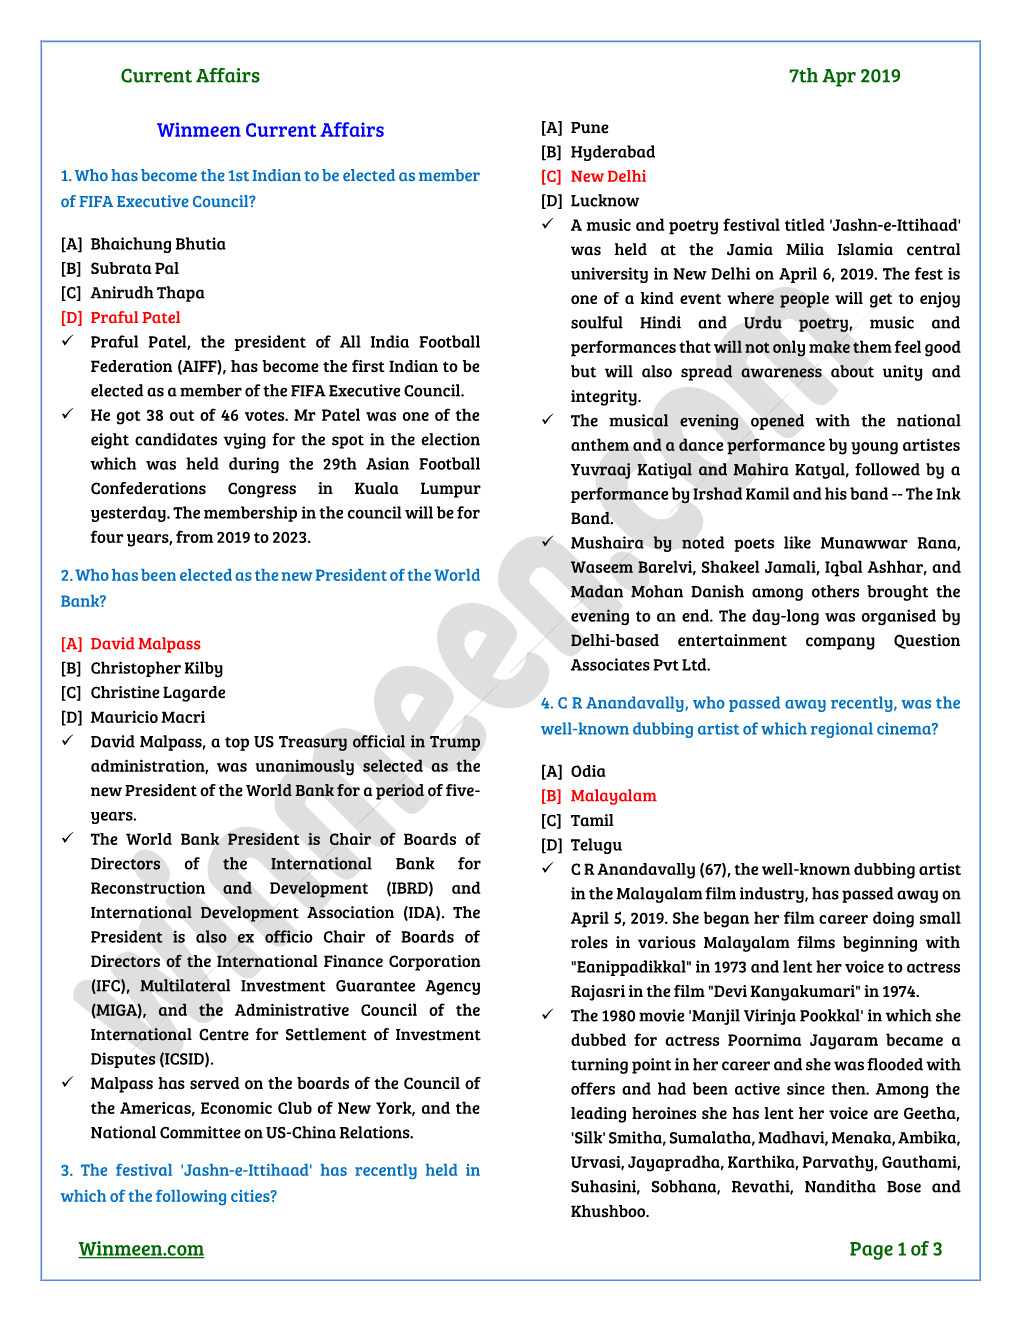 Current Affairs 7Th Apr 2019 Winmeen.Com Page 1 of 3 Winmeen Current Affairs